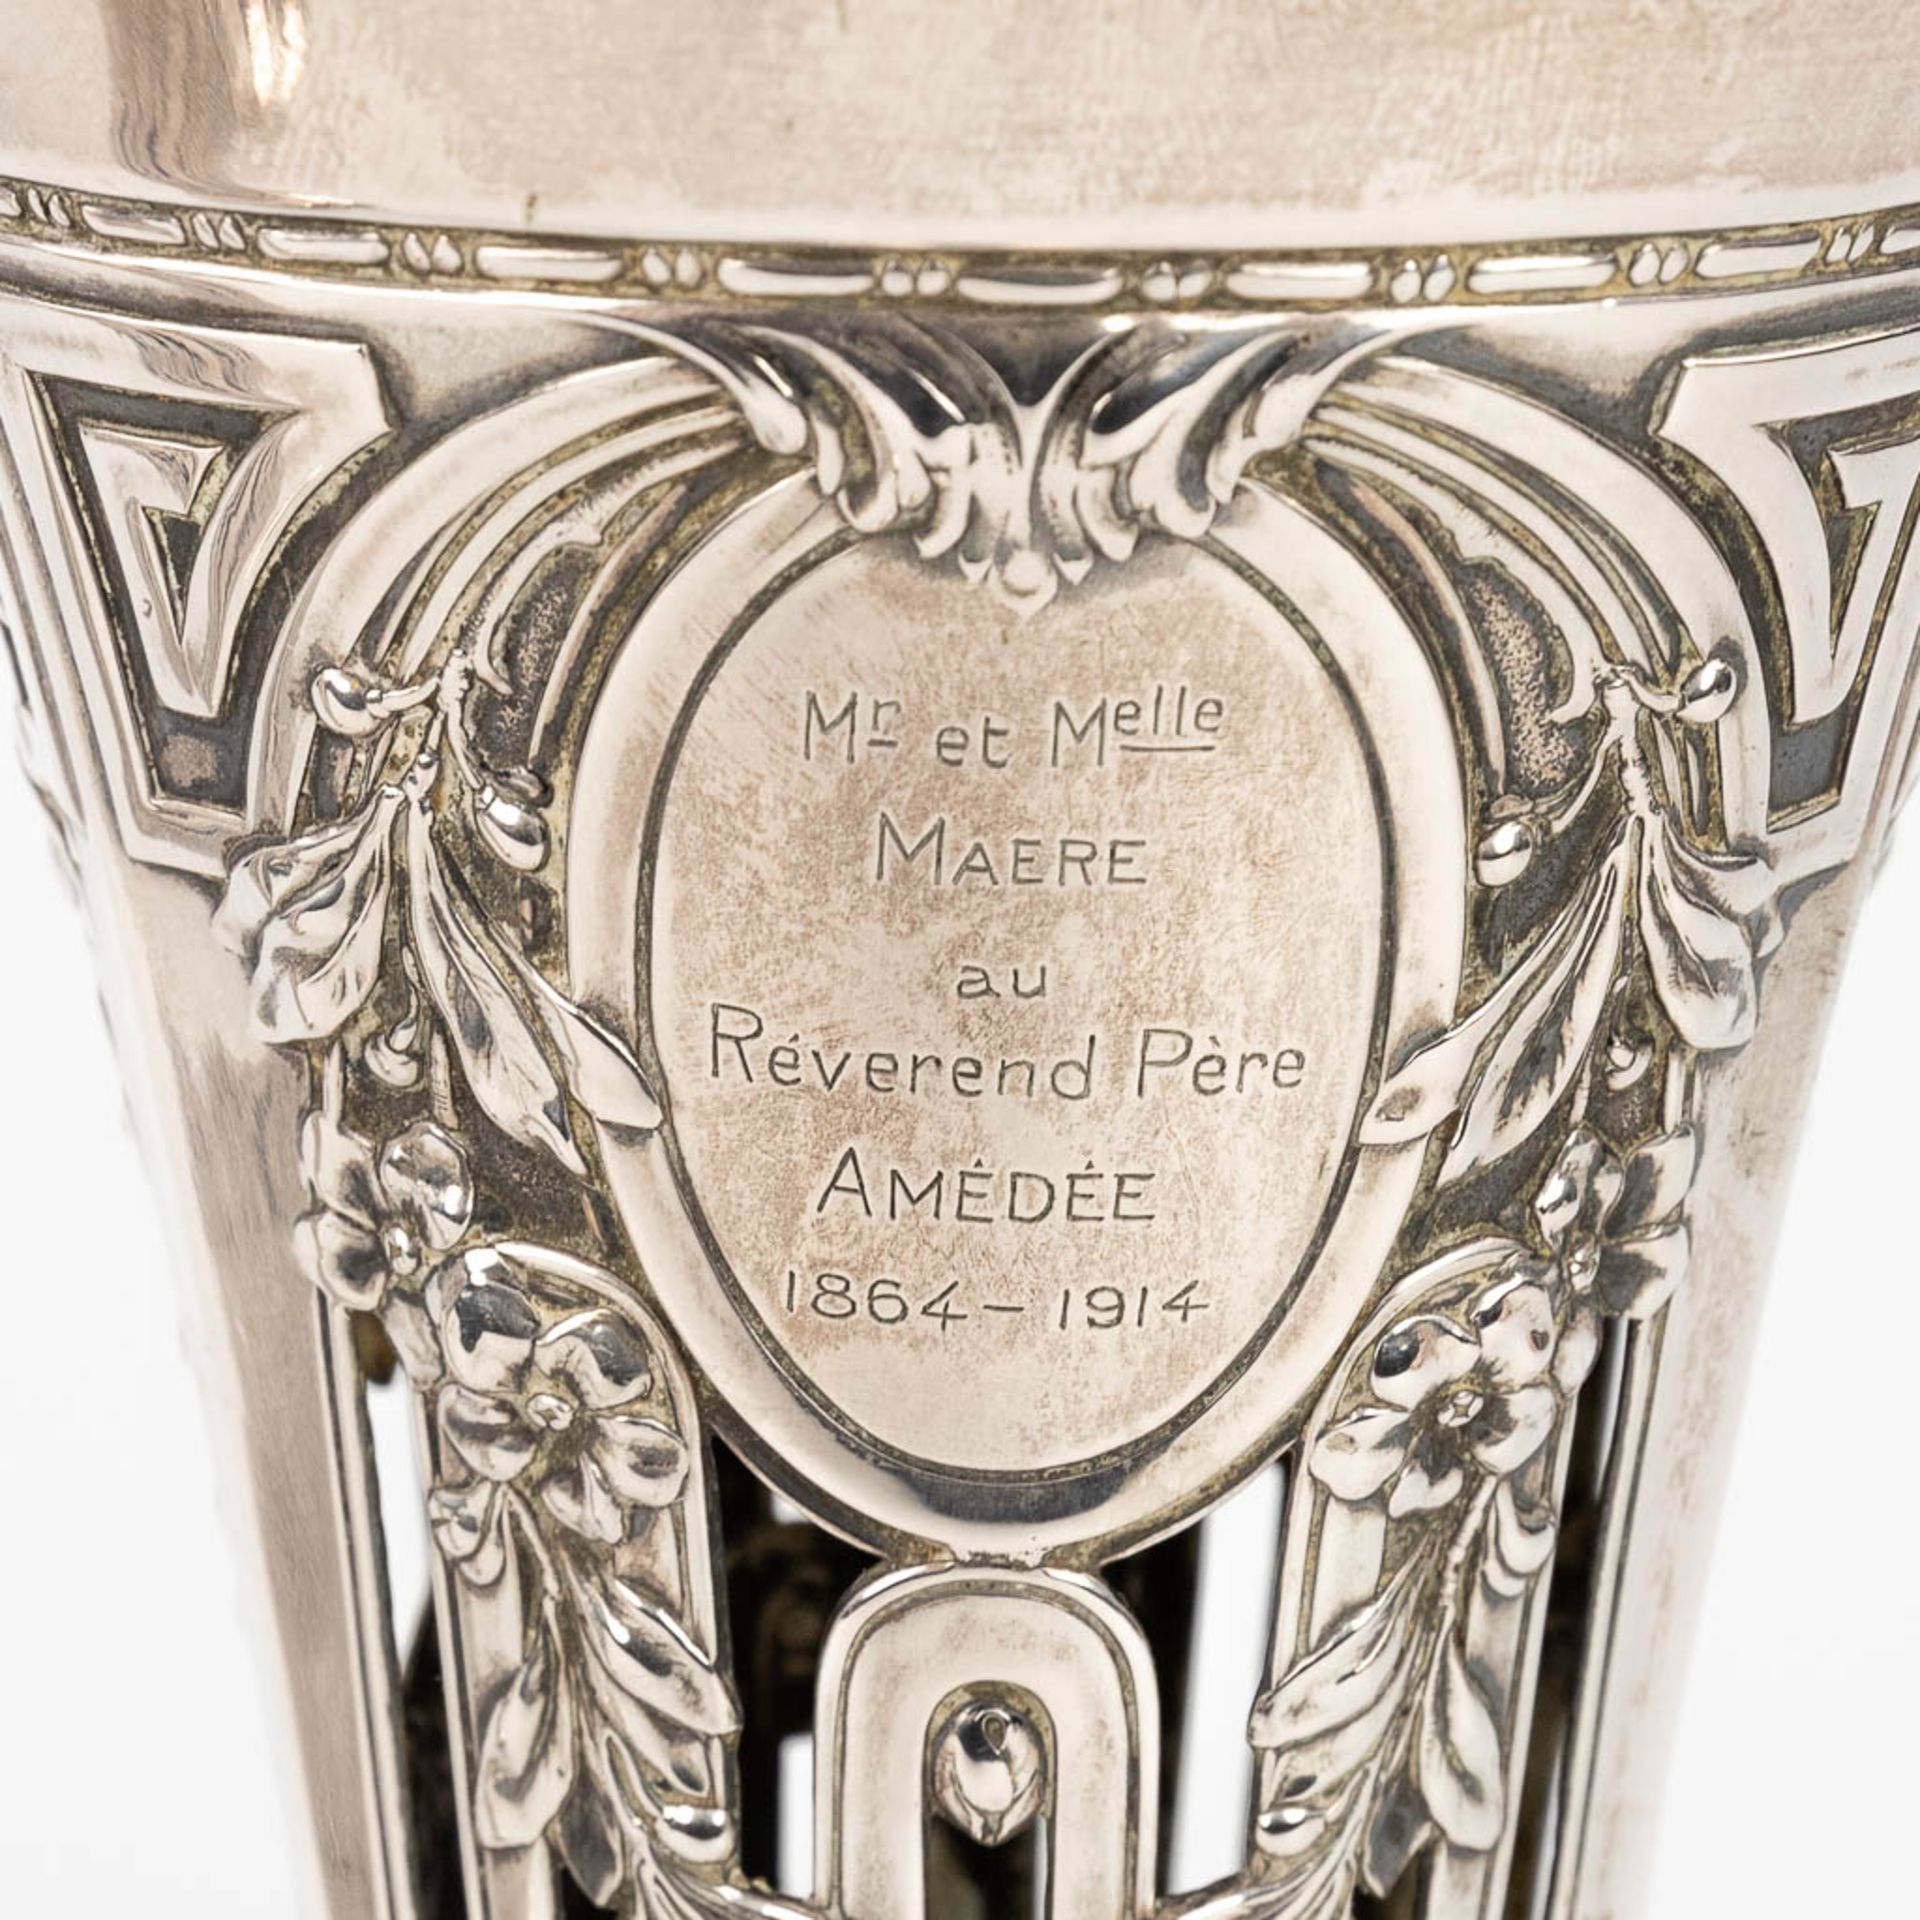 A pair of vases made of silver and marked 800. Made in Germany. 693g. 20th C. (H:31 x D:15,5 cm) - Image 12 of 14